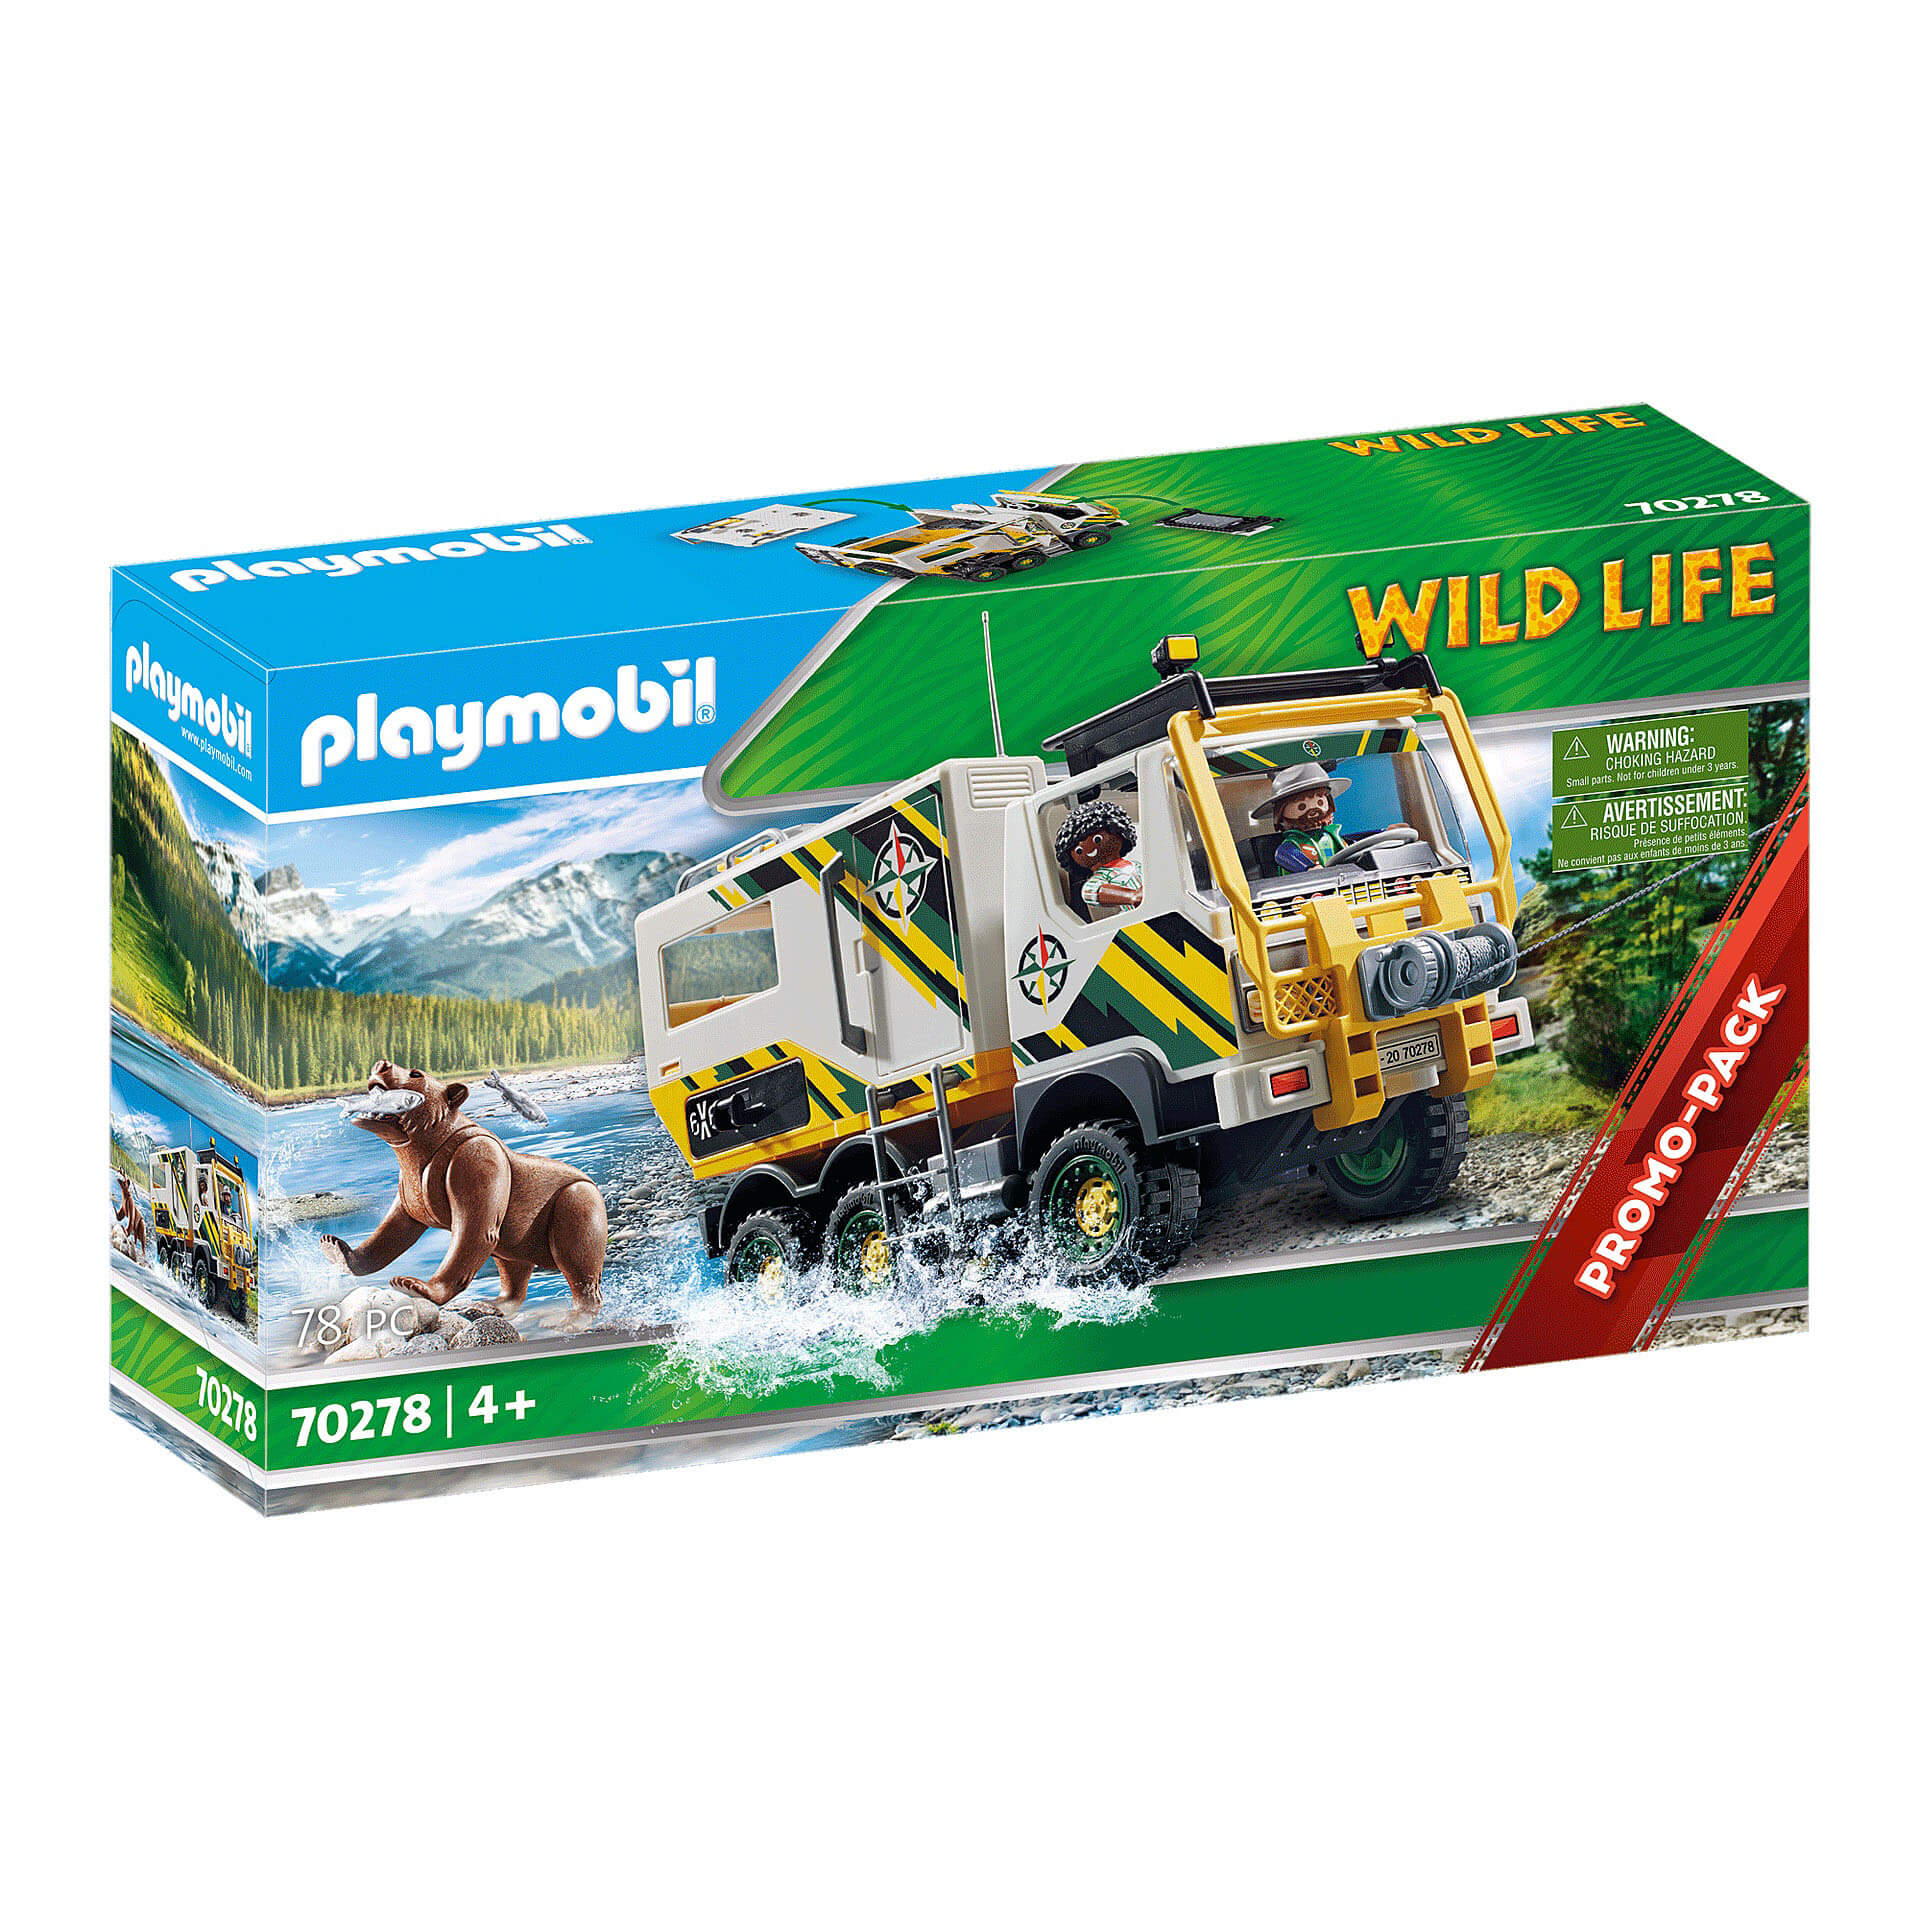 PLAYMOBIL Limited Edition Truck Outdoor Expedition Truck (70278)